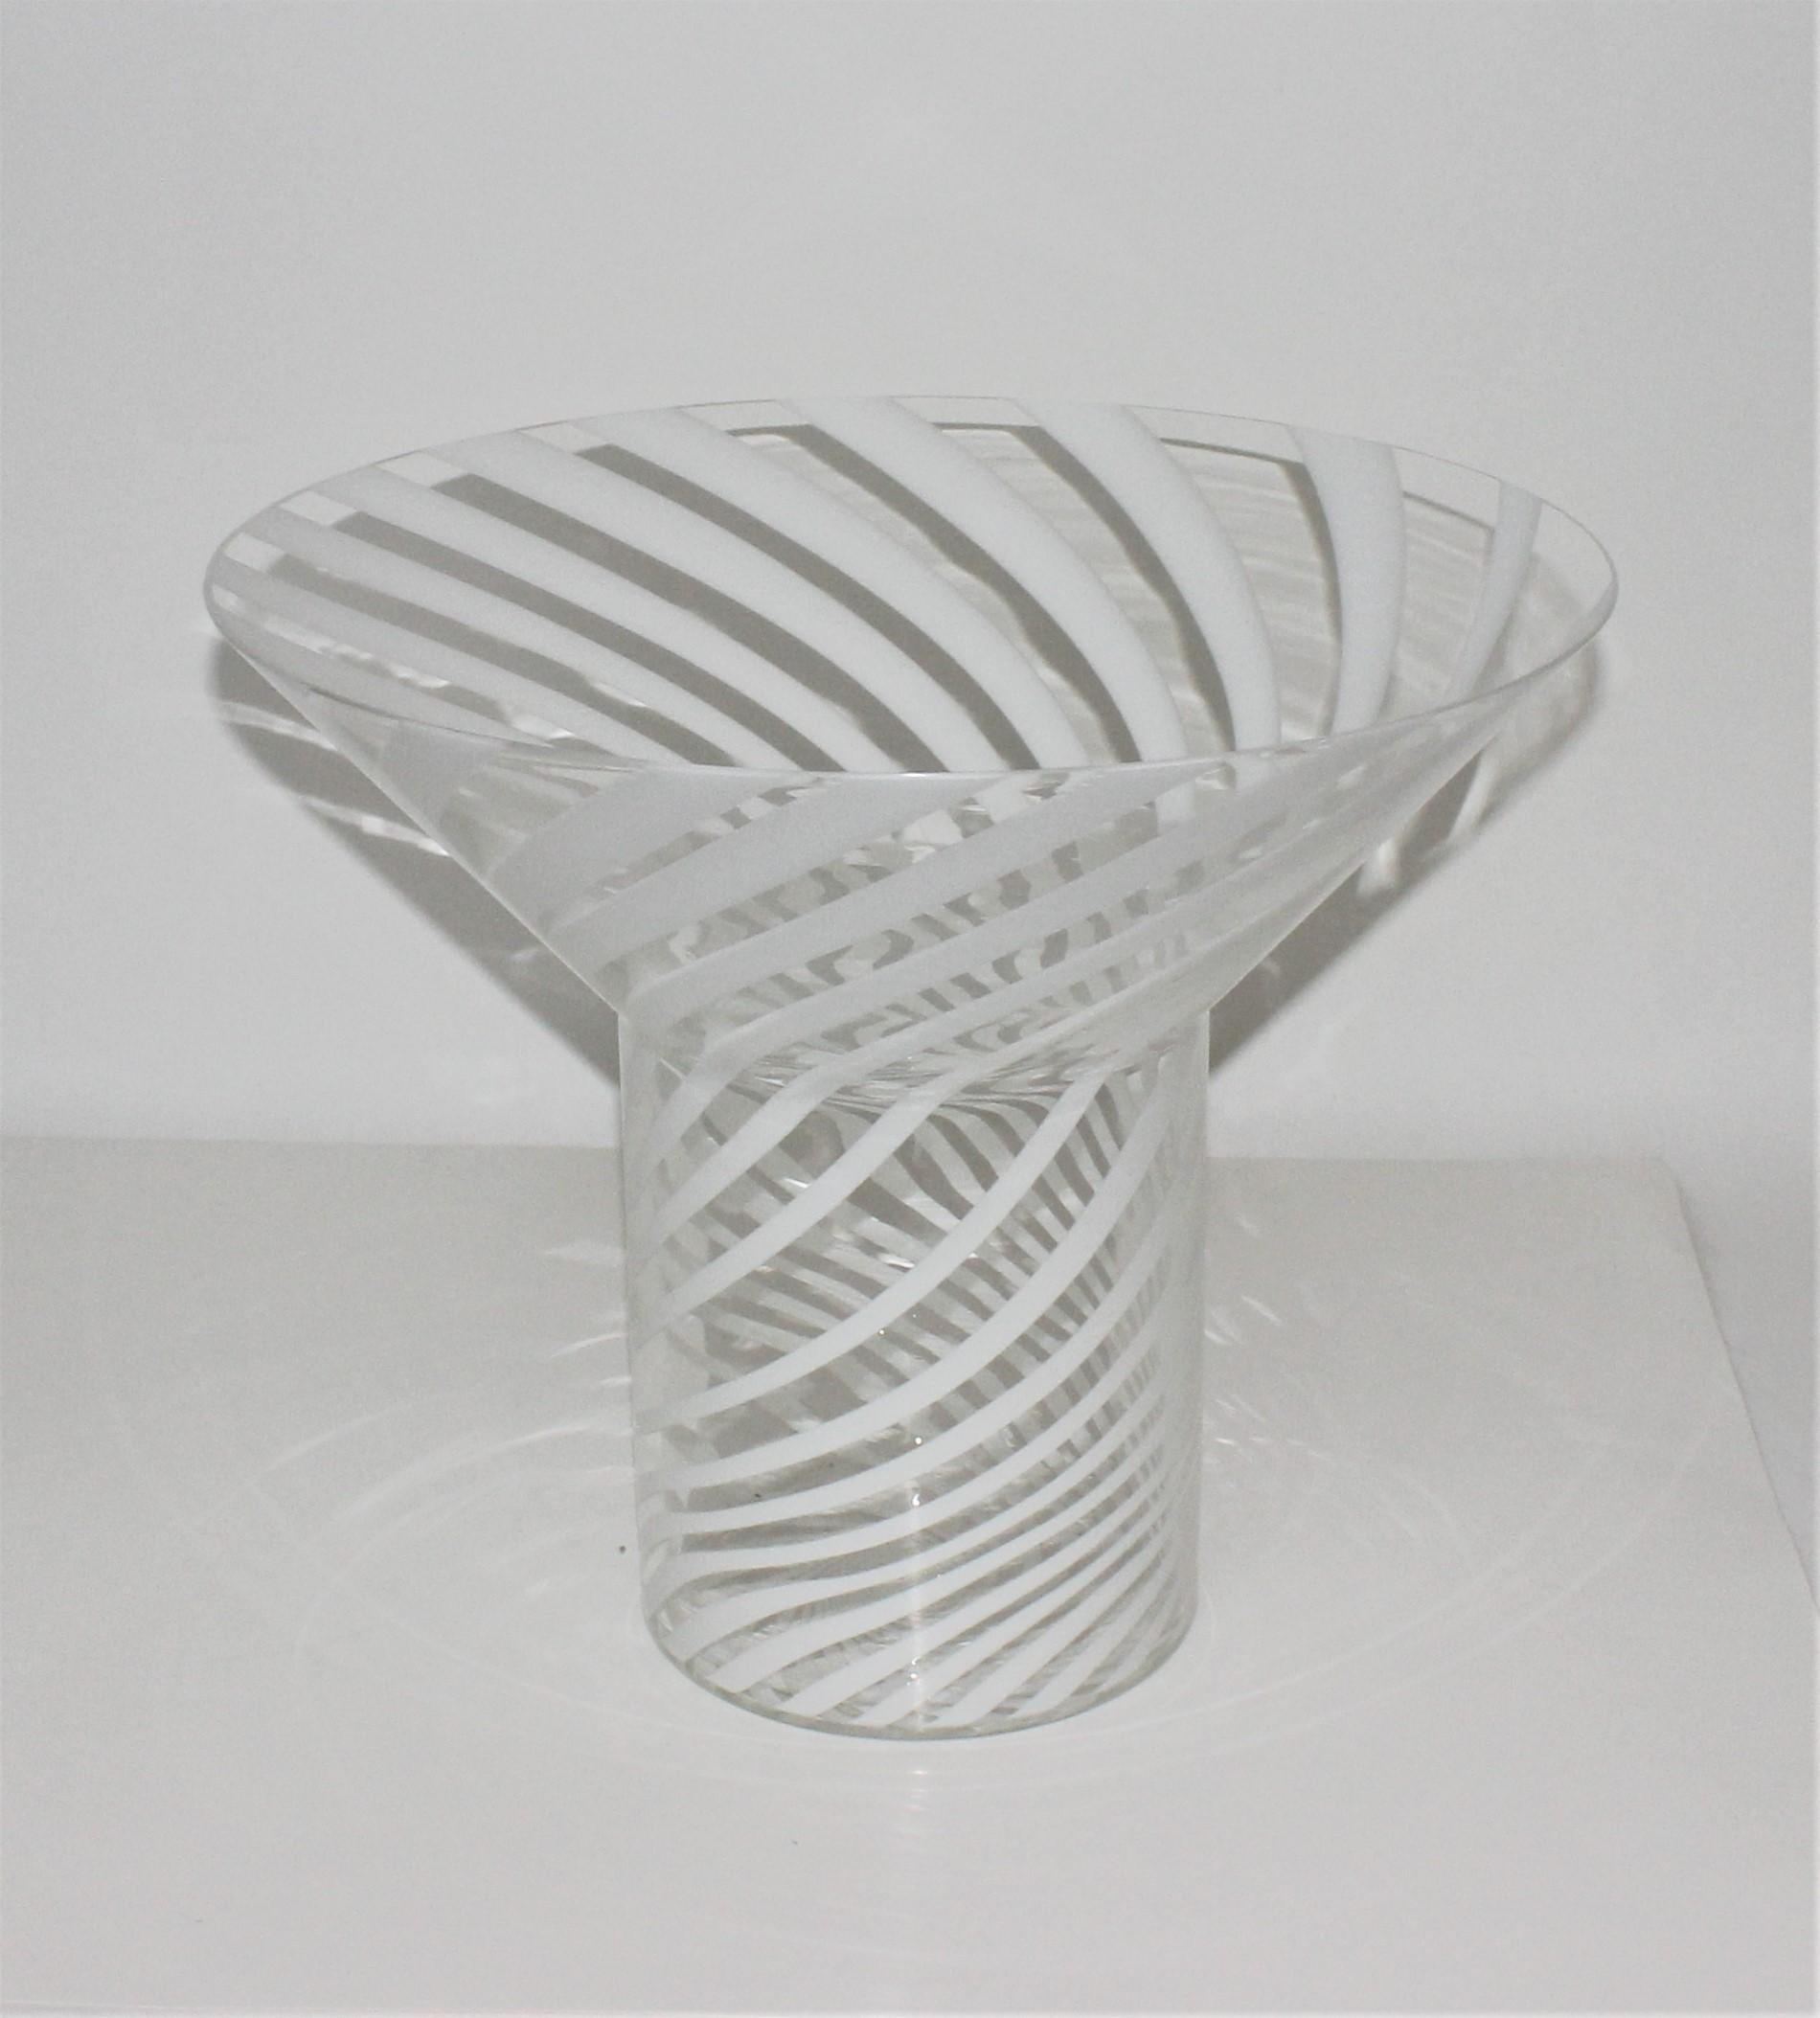 Mid-Century Modern fratelli Toso Murano glass vase in canne sculpture technique from a Palm Beach Estate.